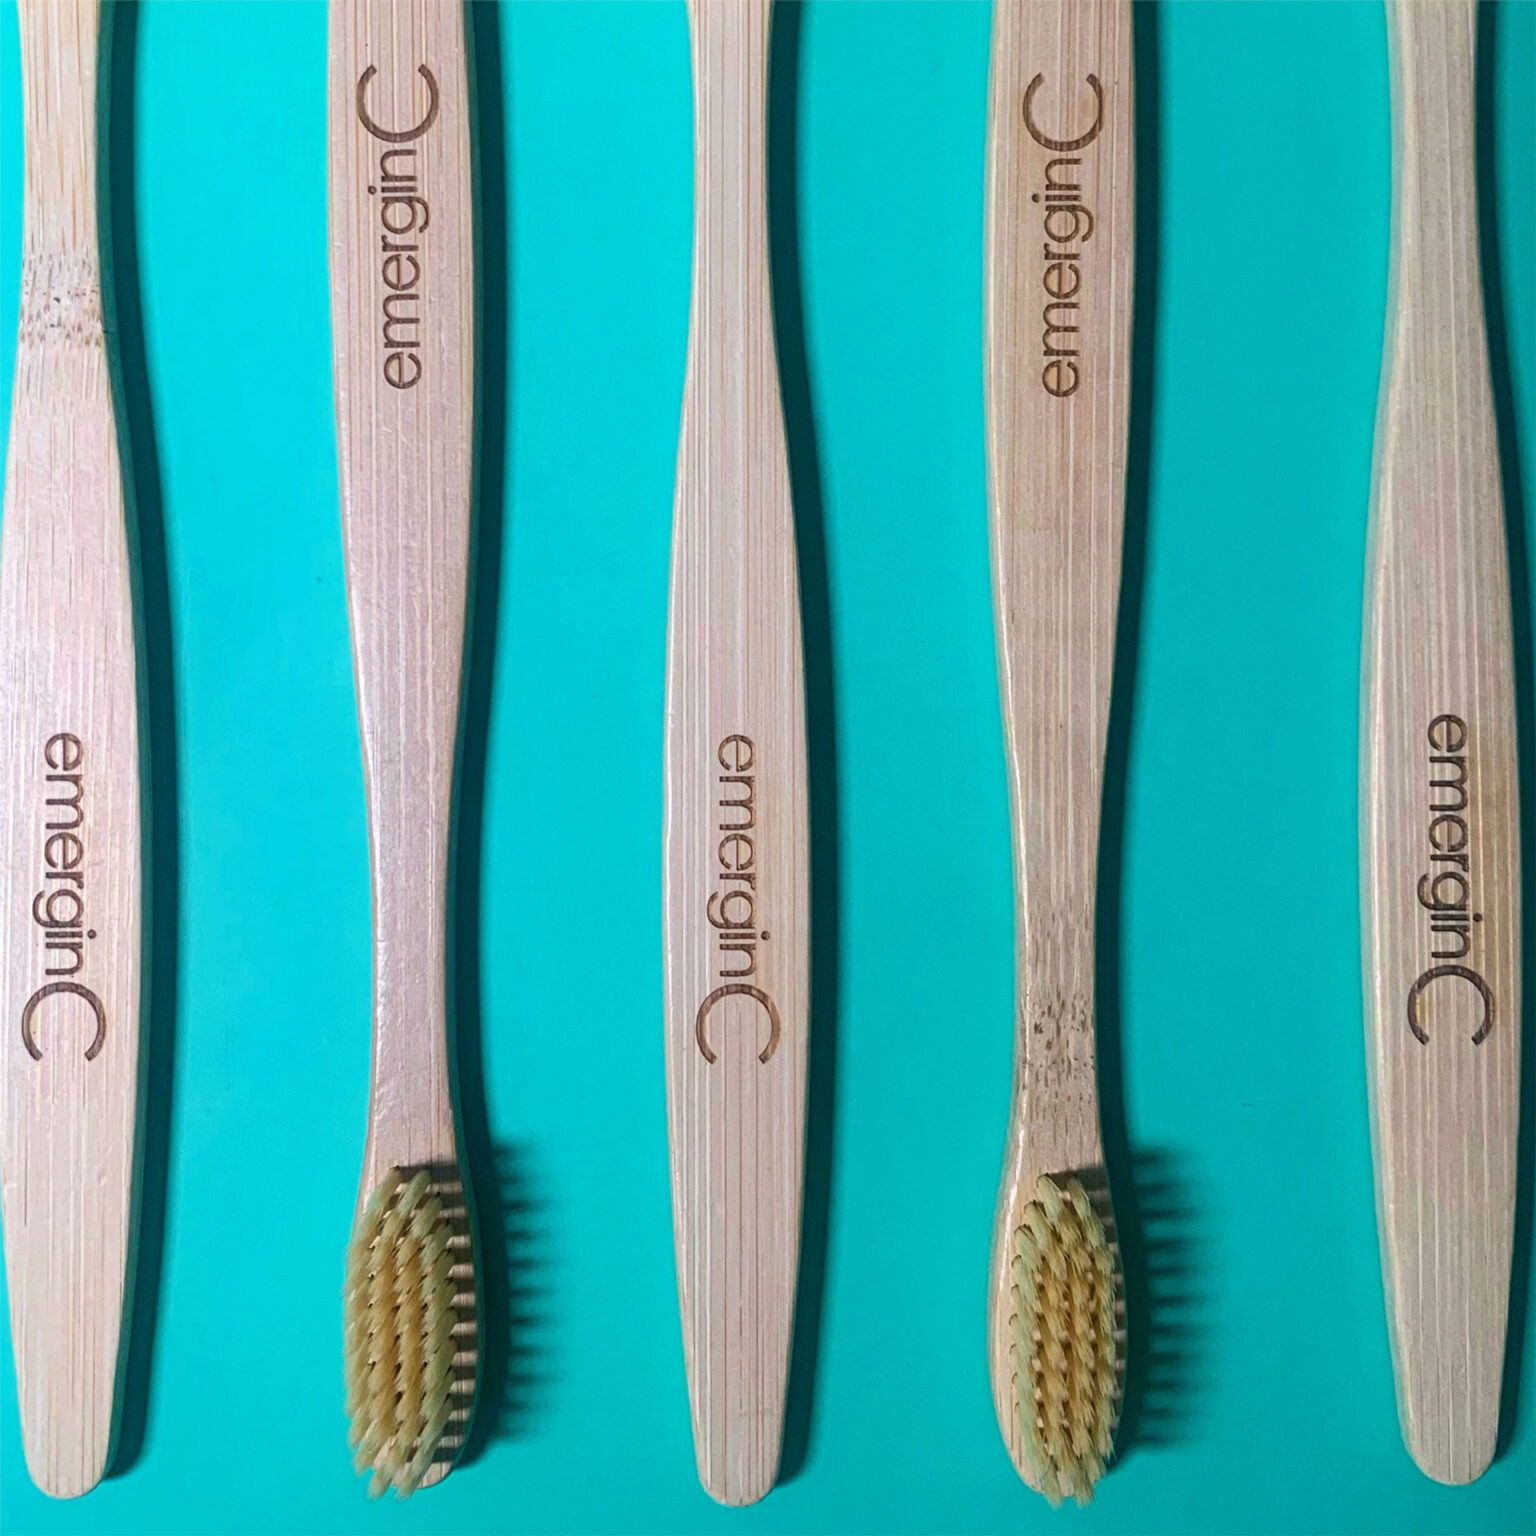 Four bamboo toothbrushes with green bristles, aligned horizontally, displayed on a turquoise background. each brush is marked with the brand 